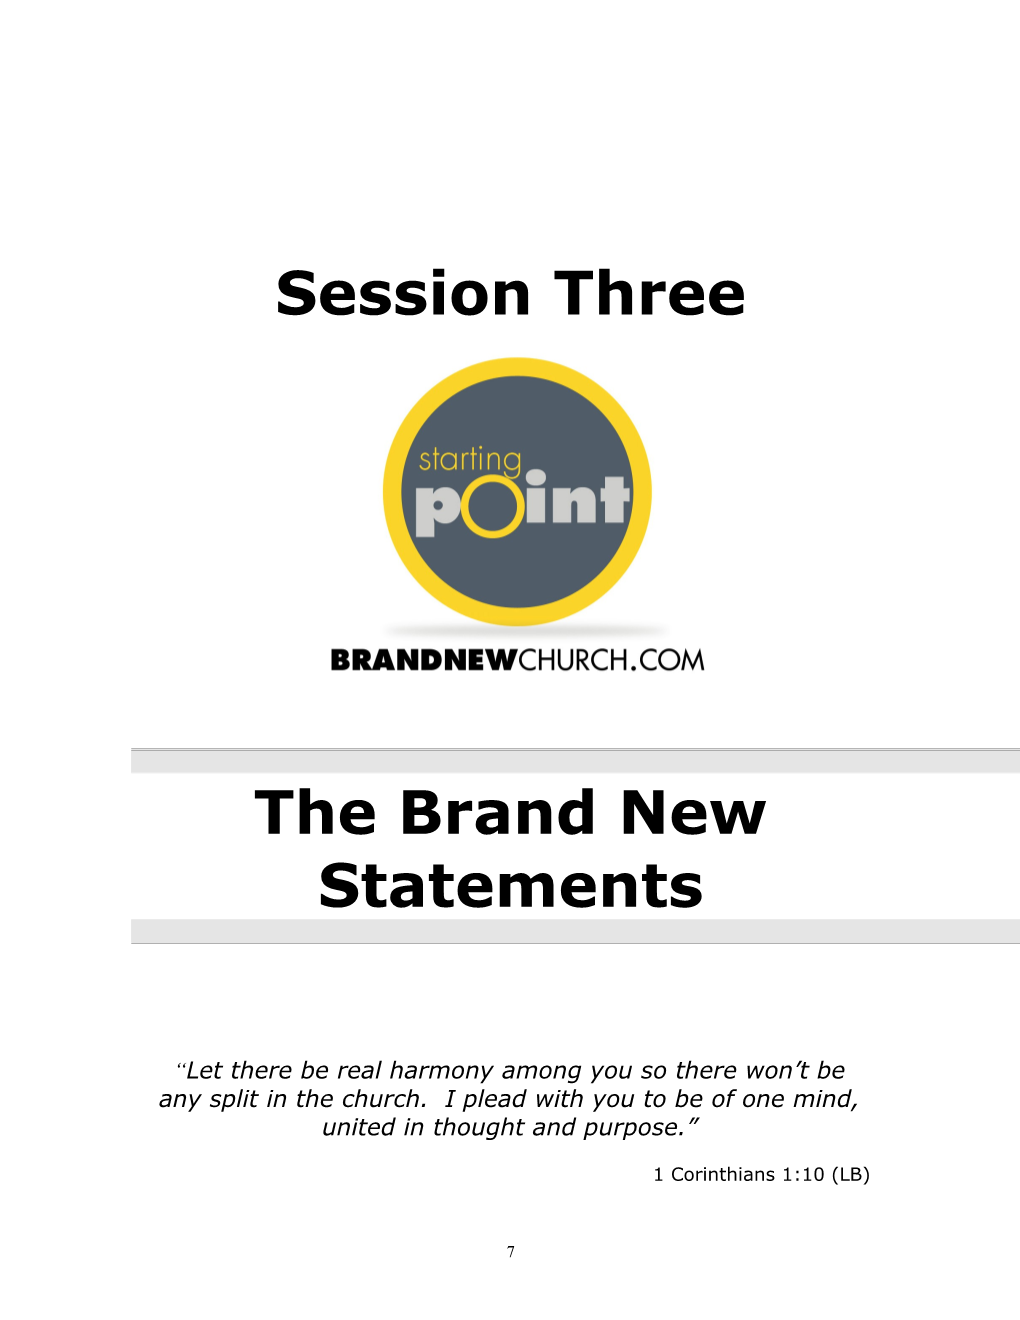 The Brand New Statements